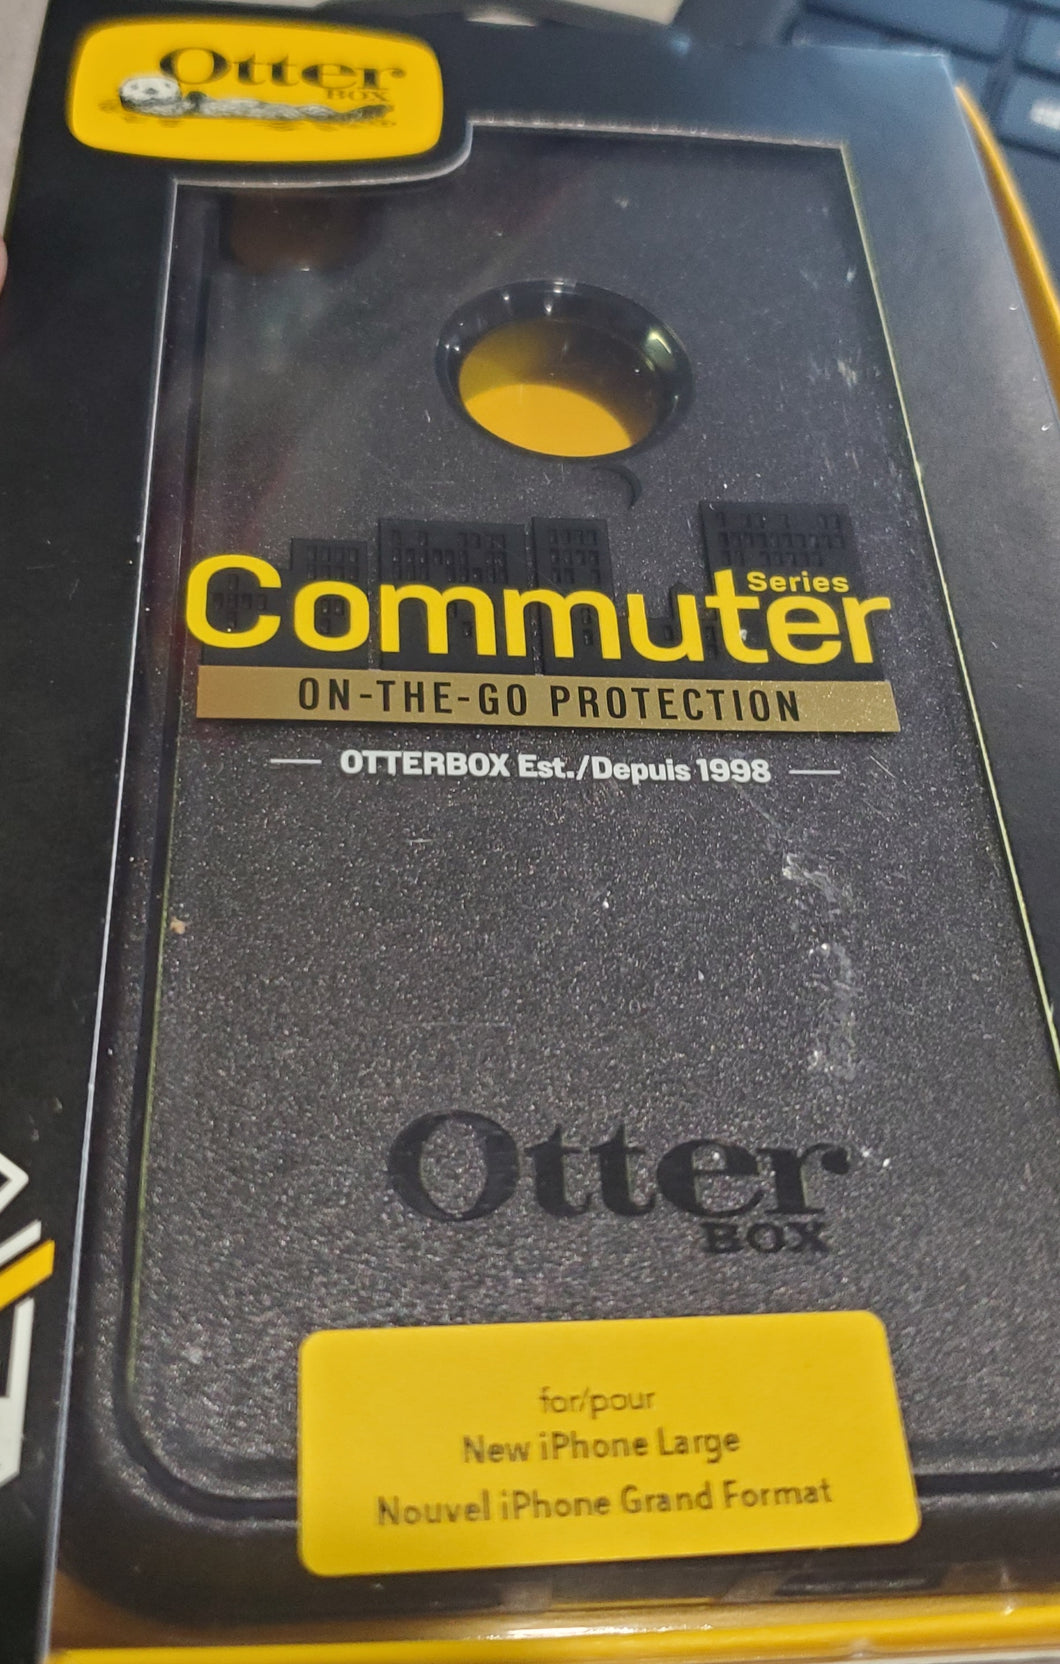 OtterBox Commuter Protective Series Compact Case for New iPhone Large - Black